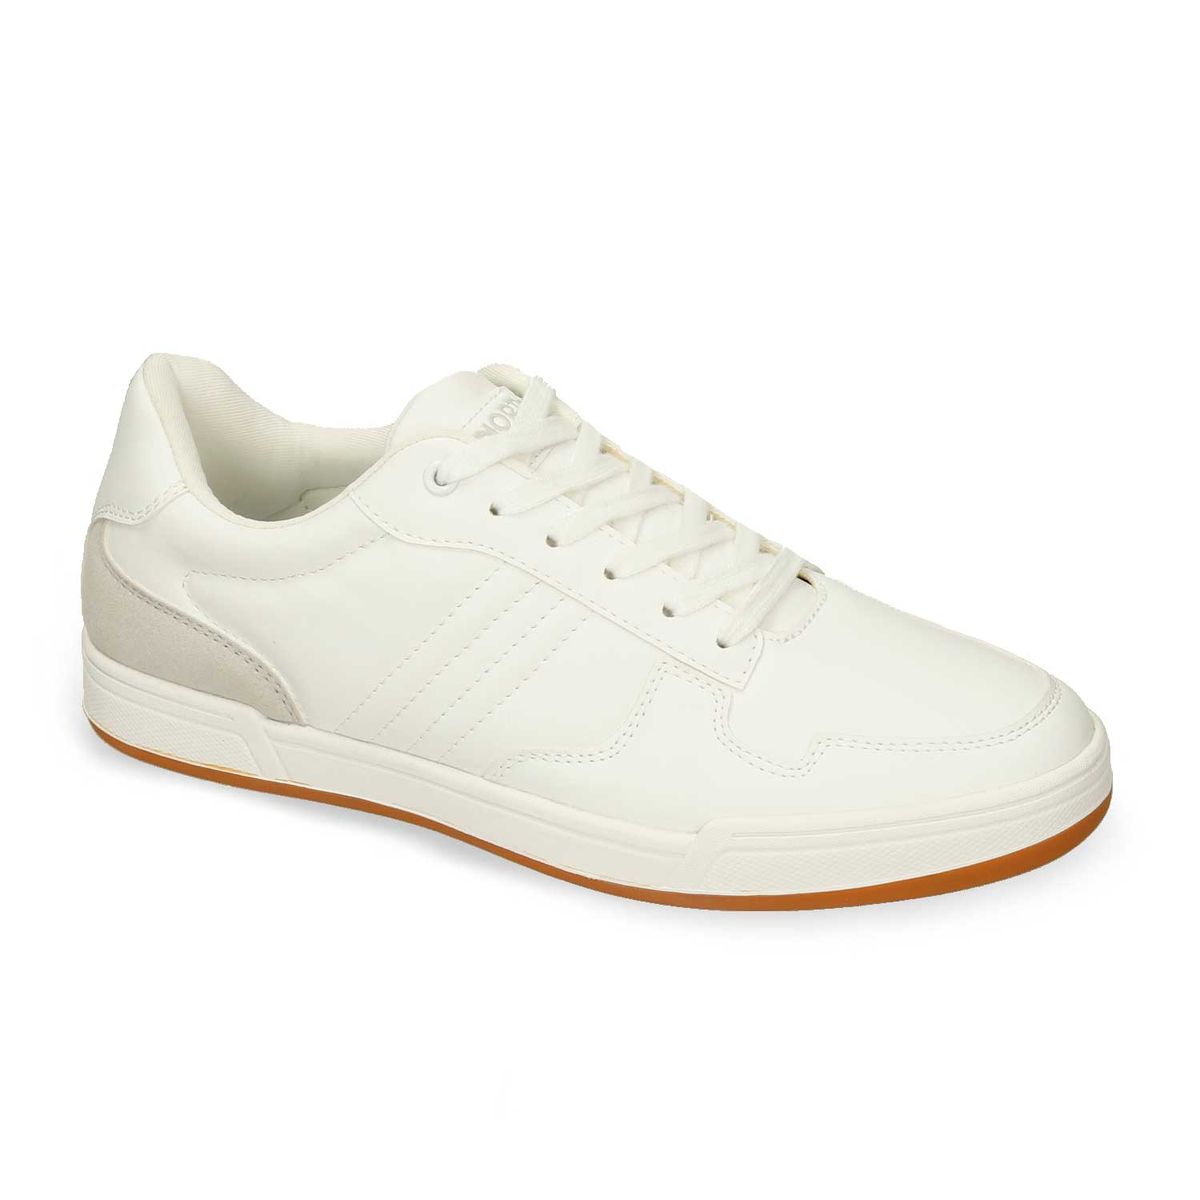 Tenis Casuales Blanco North Star Goliat New York Hombre